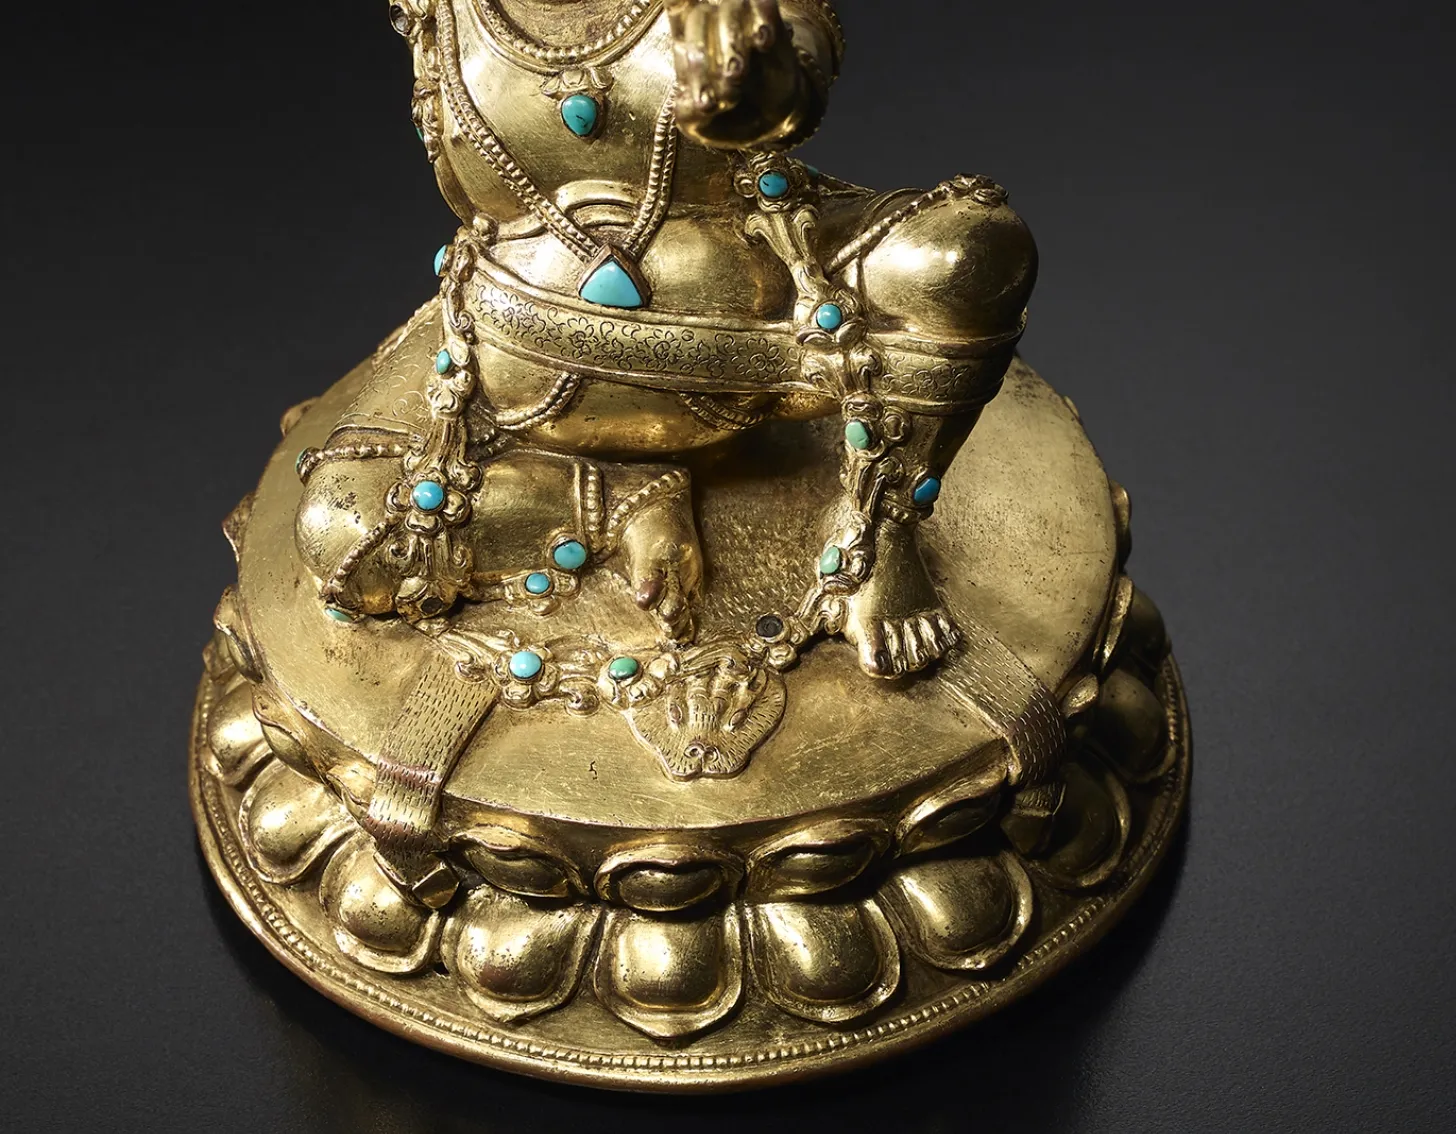 Close up look of : A gilt copper alloy figure of Virupa